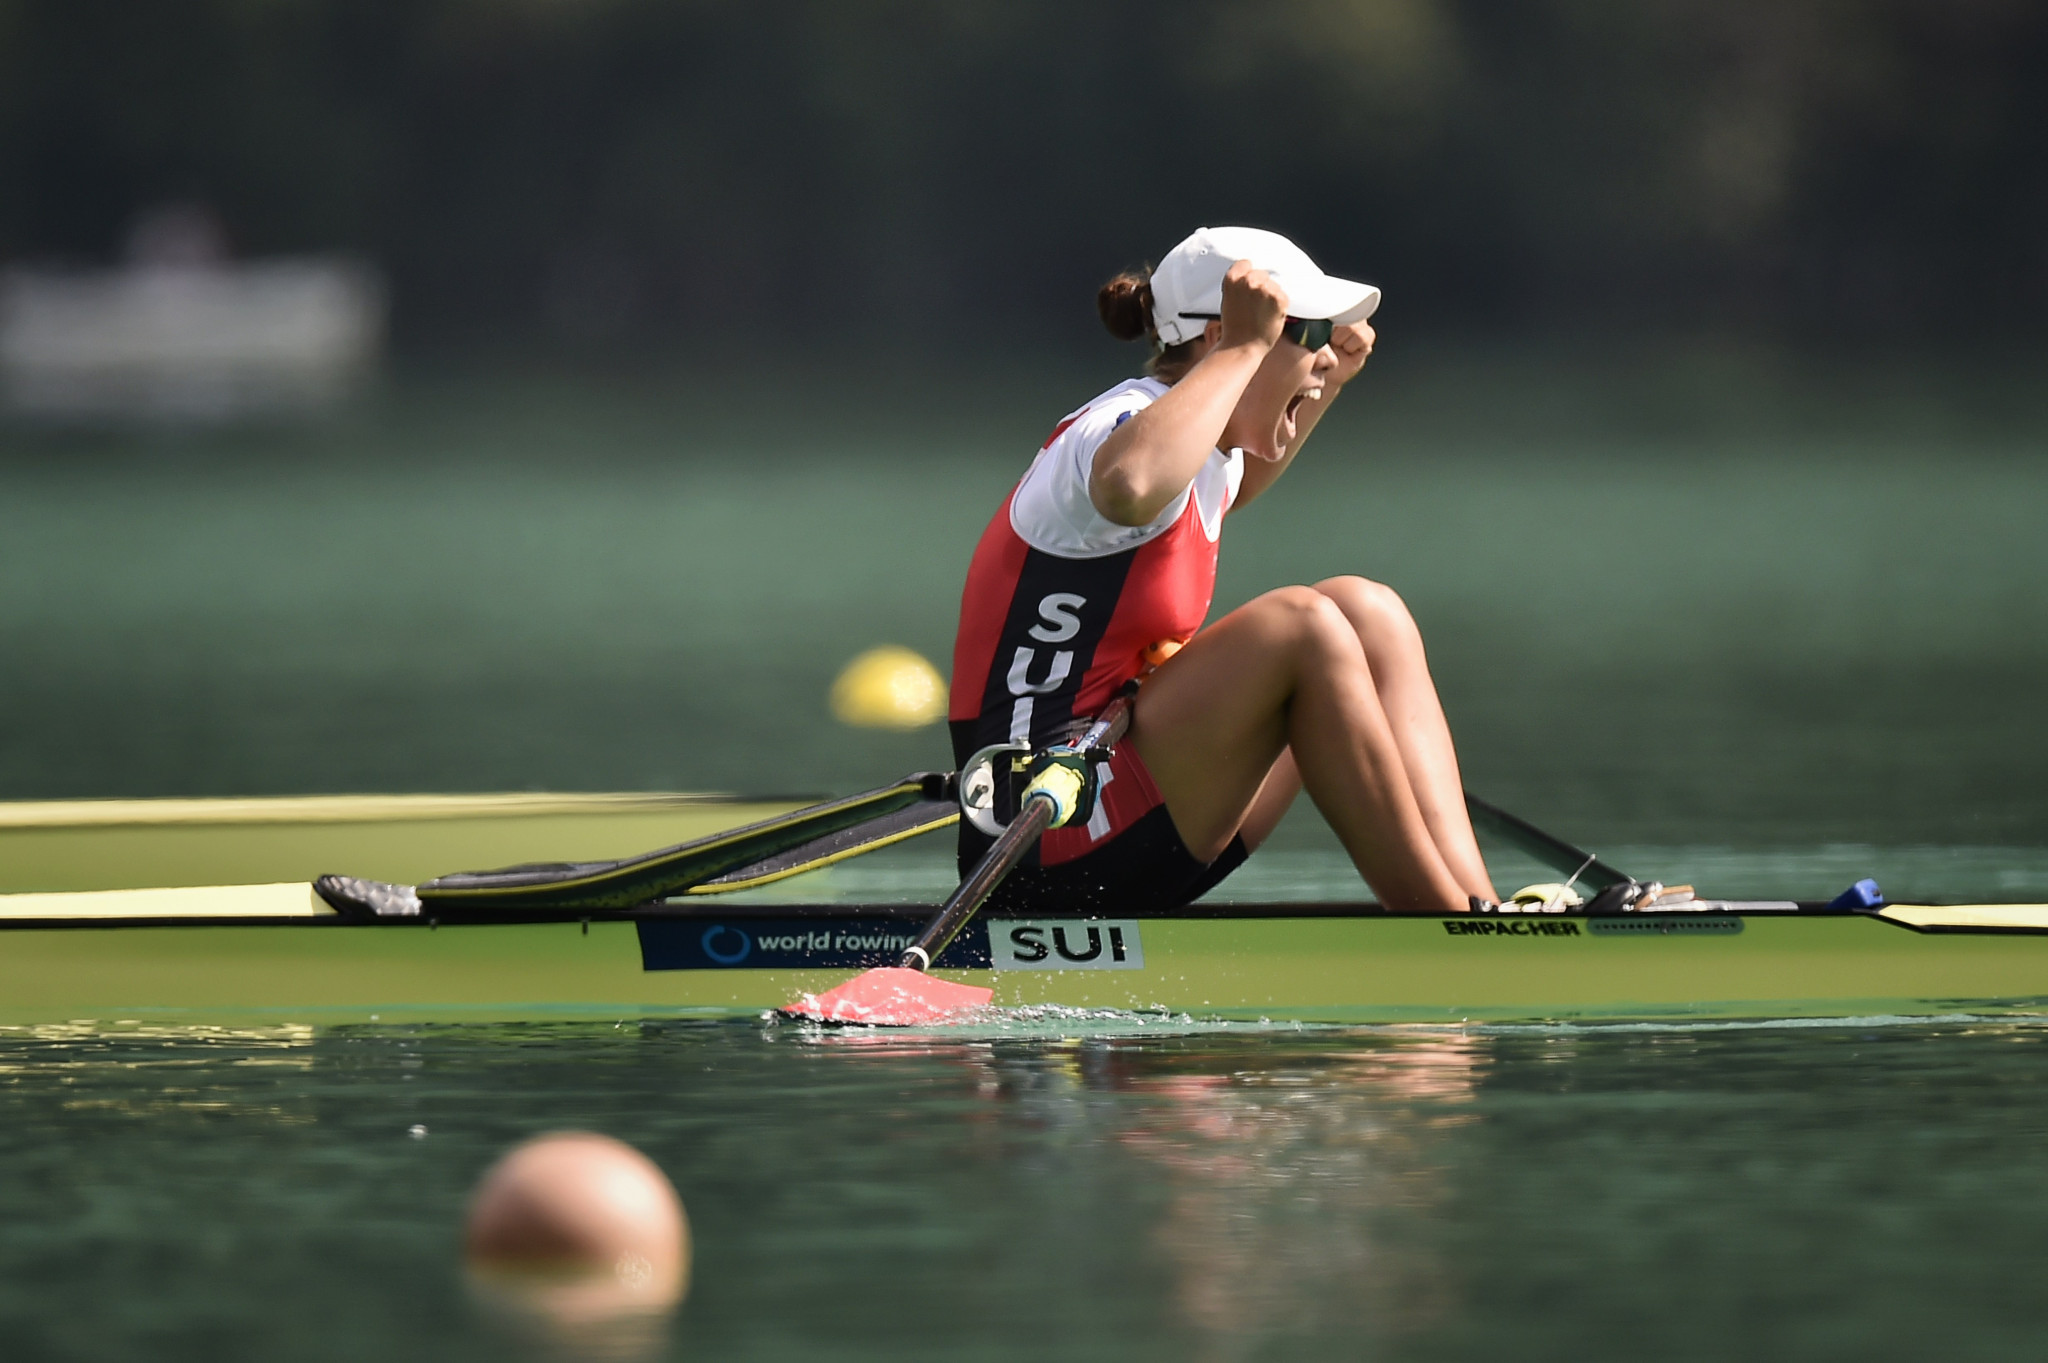 Jeannine Gmelin will hope to make a strong start to the season in the women's single sculls ©Getty Images